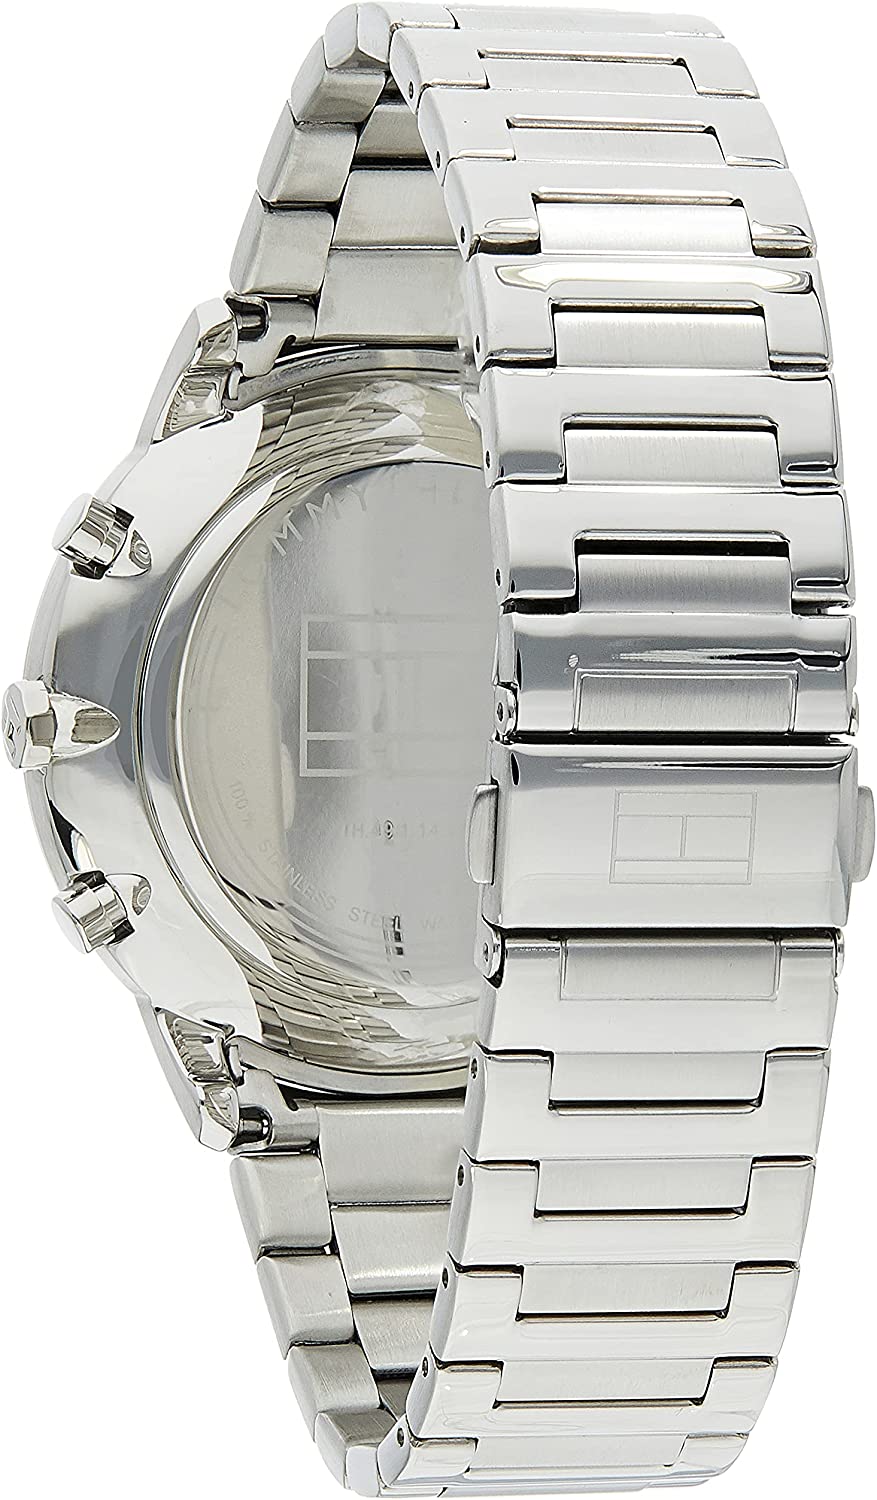 Tommy Hilfiger Analogue Multifunction Quartz Watch for Men with Silver Stainless Steel Bracelet - 1710407